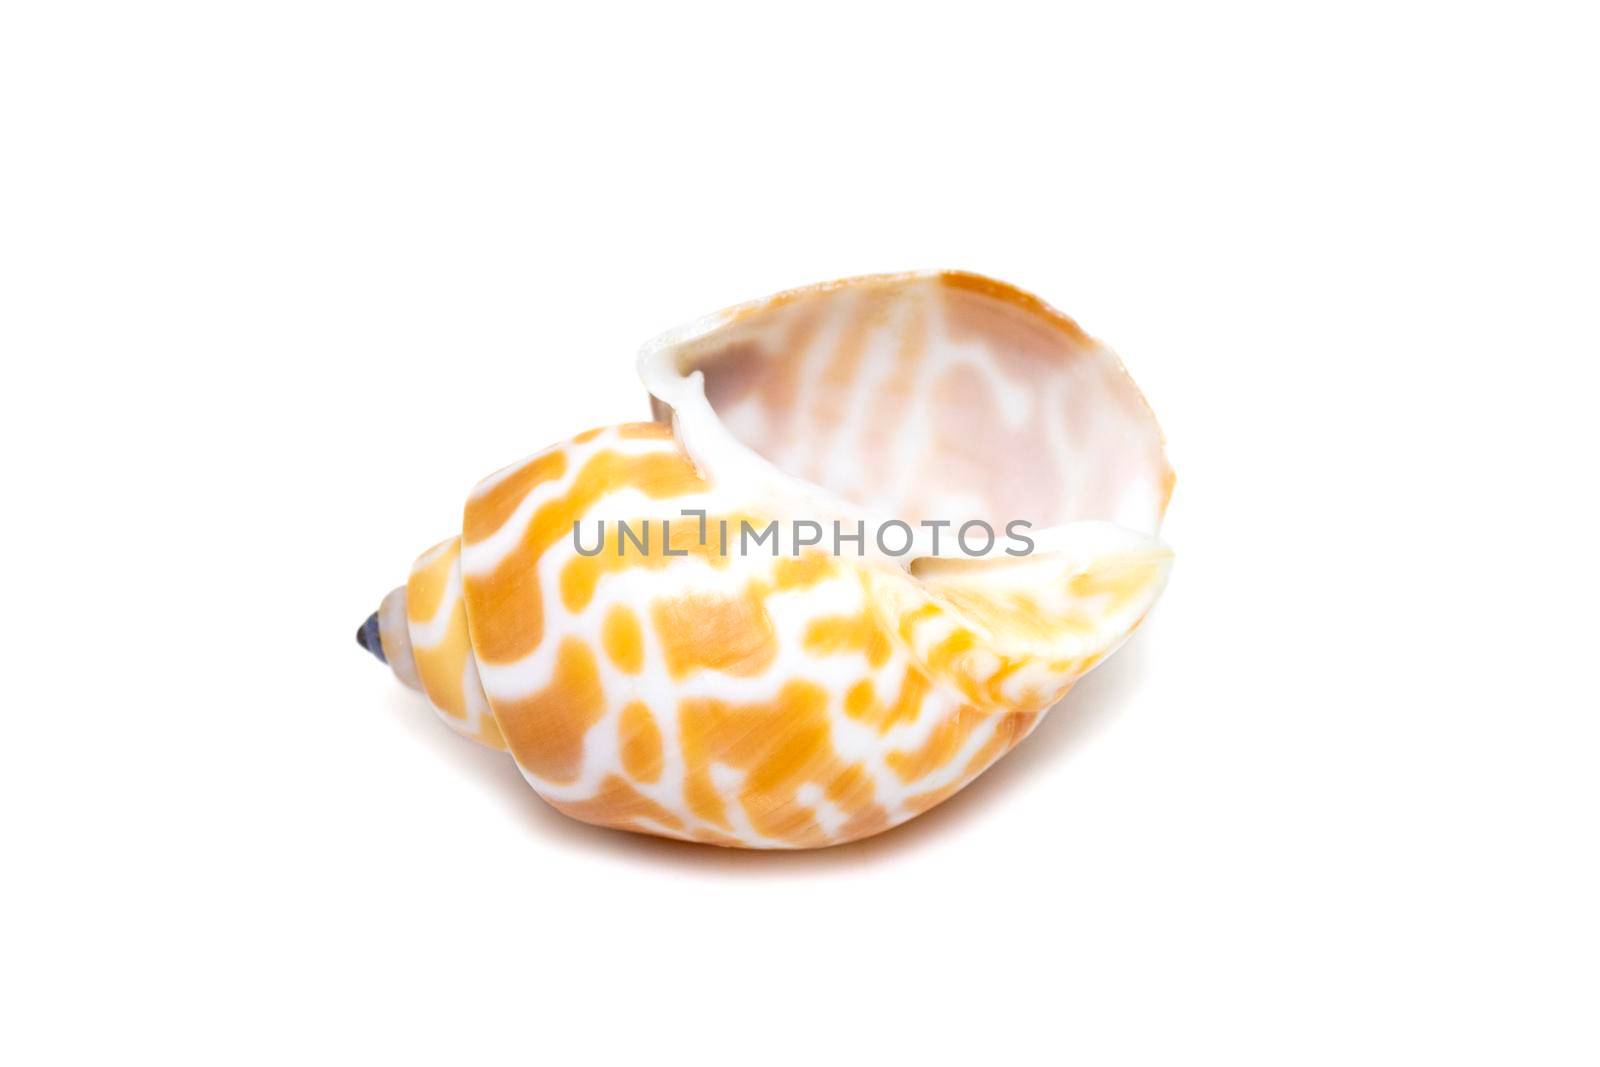 Image of babylonia spirata, common name the Spiral Babylon, is a species of sea snail, a marine gastropod mollusk, in the family Babyloniidae. isolated on white background. Sea snail. Undersea Animals. Sea Shells.